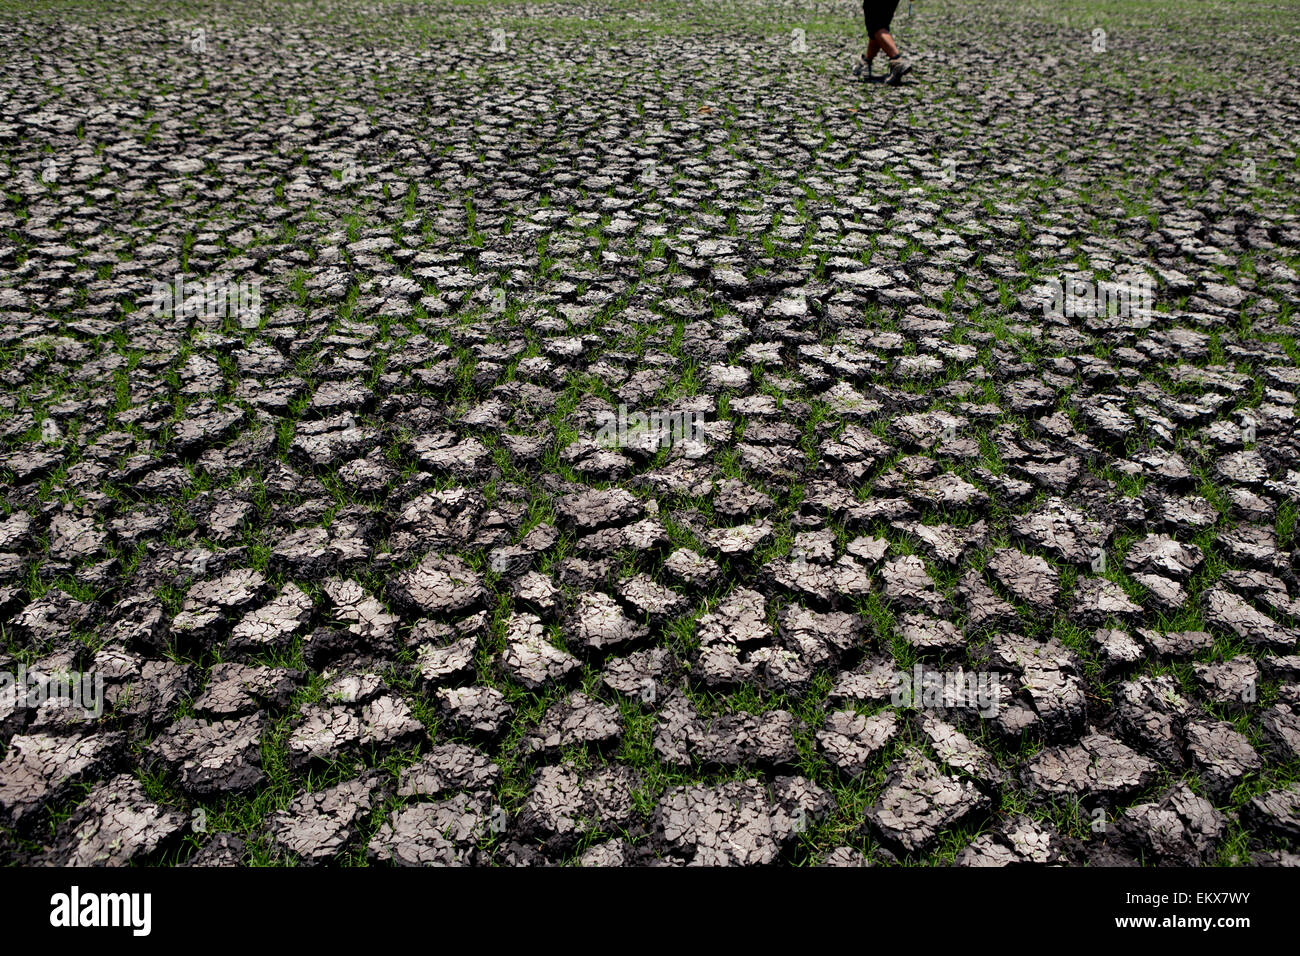 A man walking on cracked ground at the base of a drying pond during dry season in East Sumba, East Nusa Tenggara, Indonesia. Stock Photo